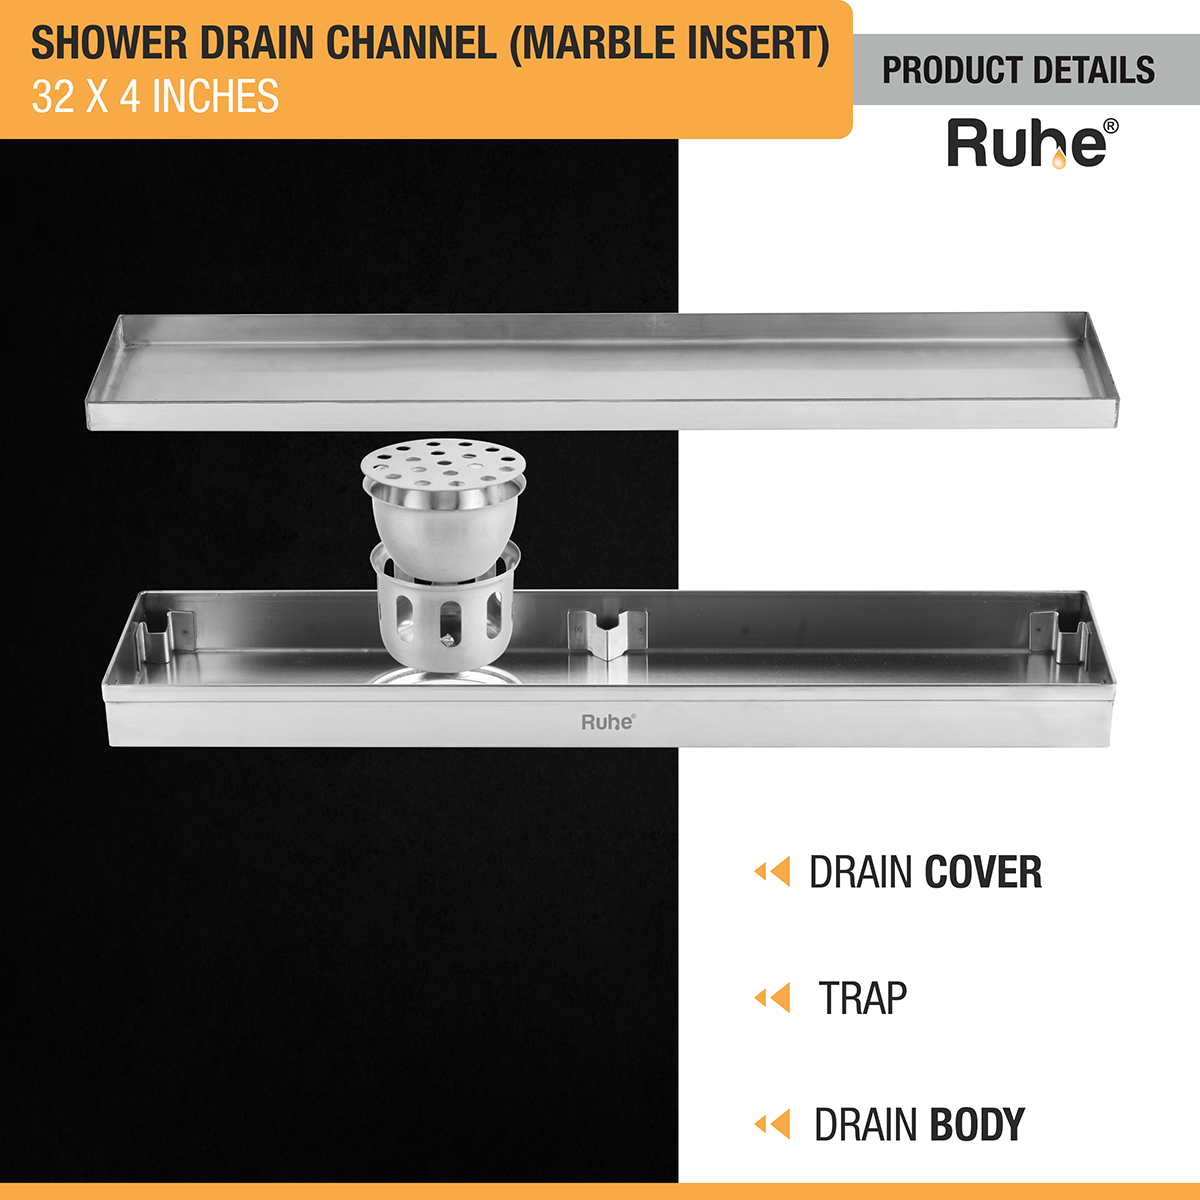 Marble Insert Shower Drain Channel (32 x 4 Inches) with Cockroach Trap (304 Grade) product details